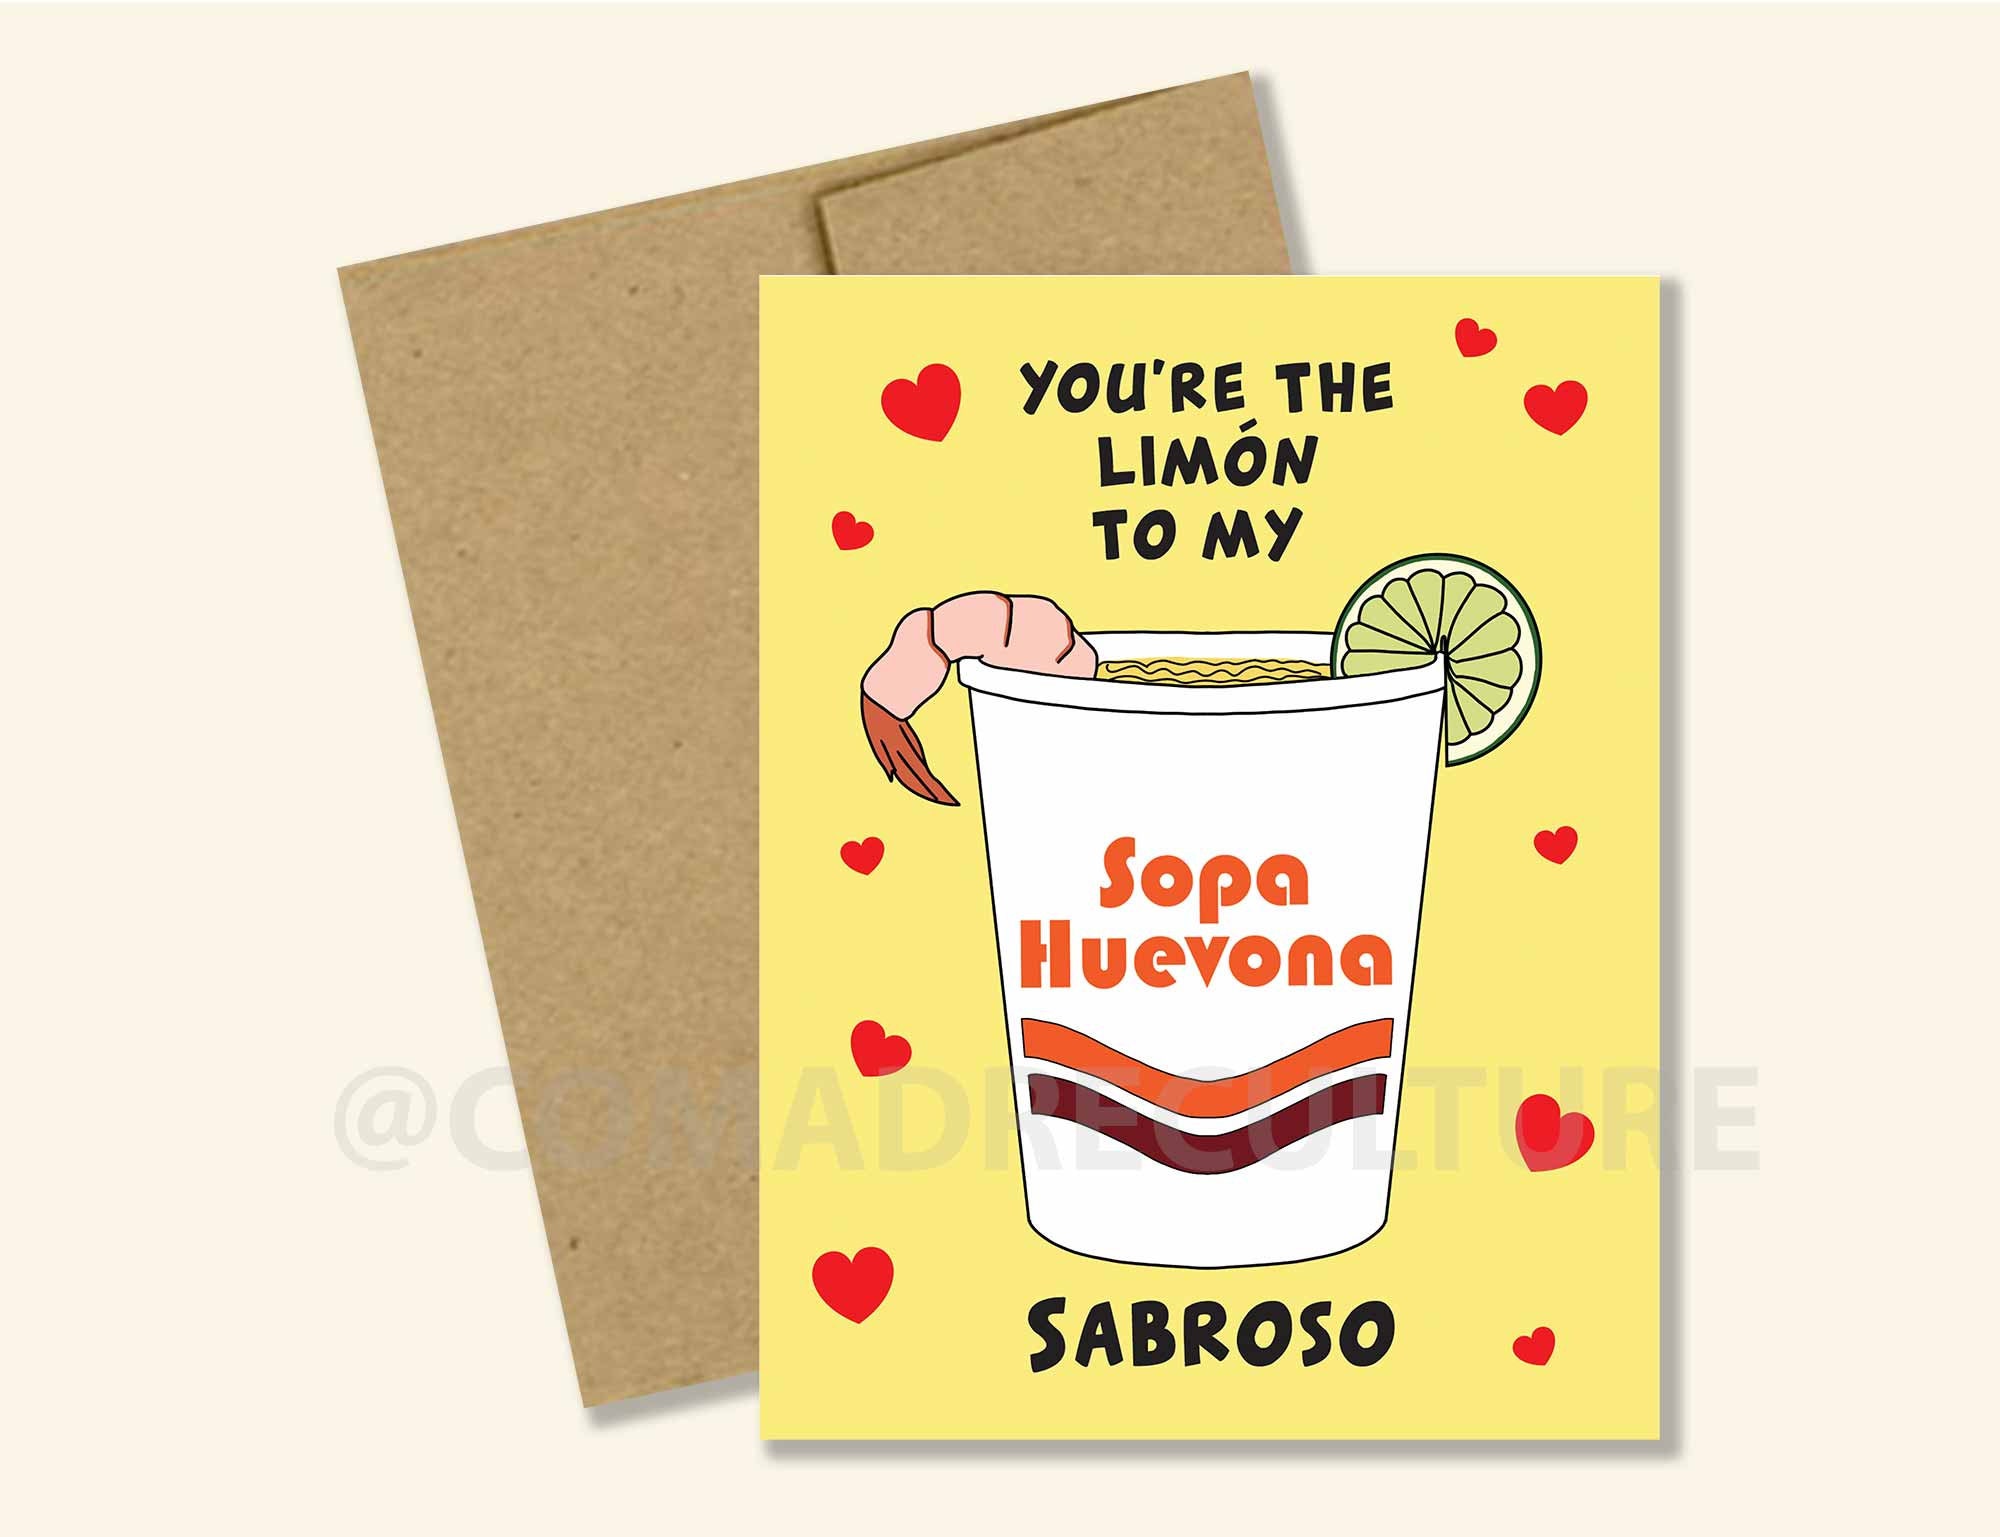 You're The Limon To My Sopa Huevona, Sabroso, Maruchan, Cup Noodles, Ramen, Funny Valentine'd Day Card, Spanglish Latinx Shop